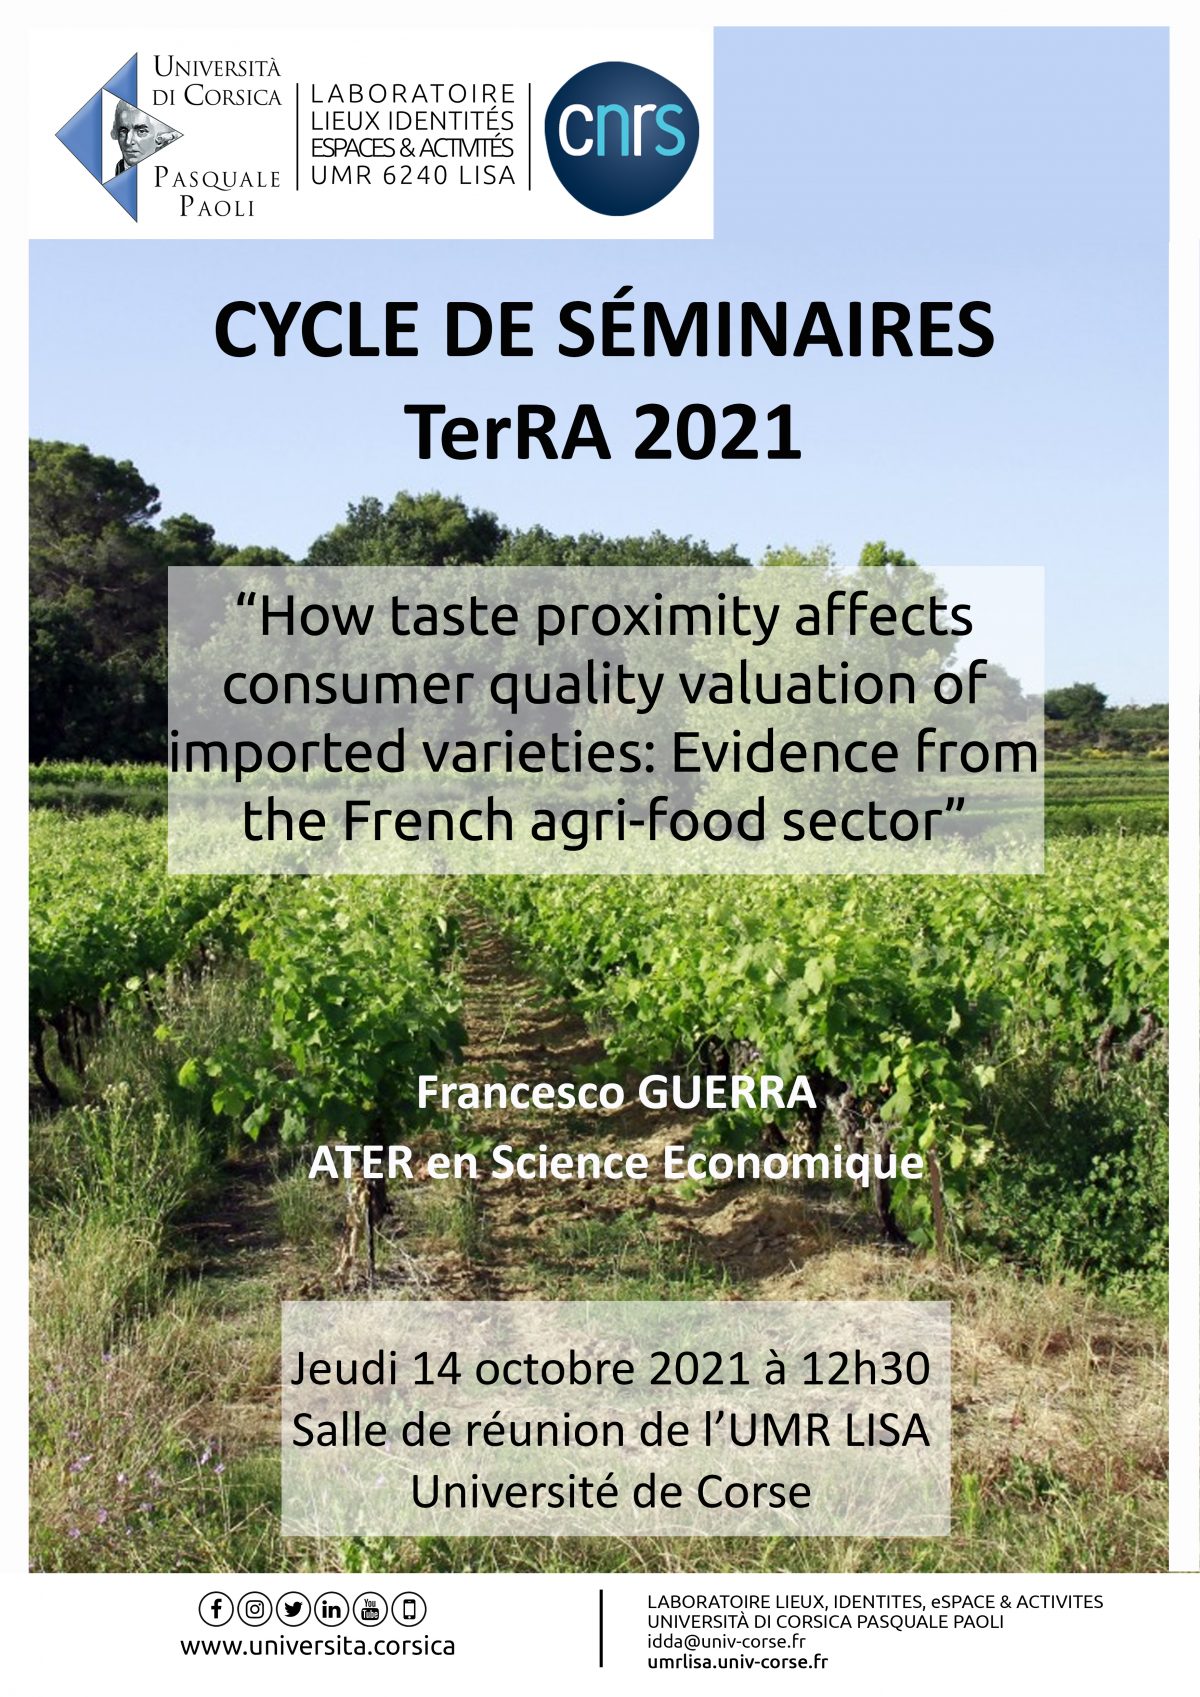 Séminaire « How taste proximity affects consumer quality valuation of imported varieties »